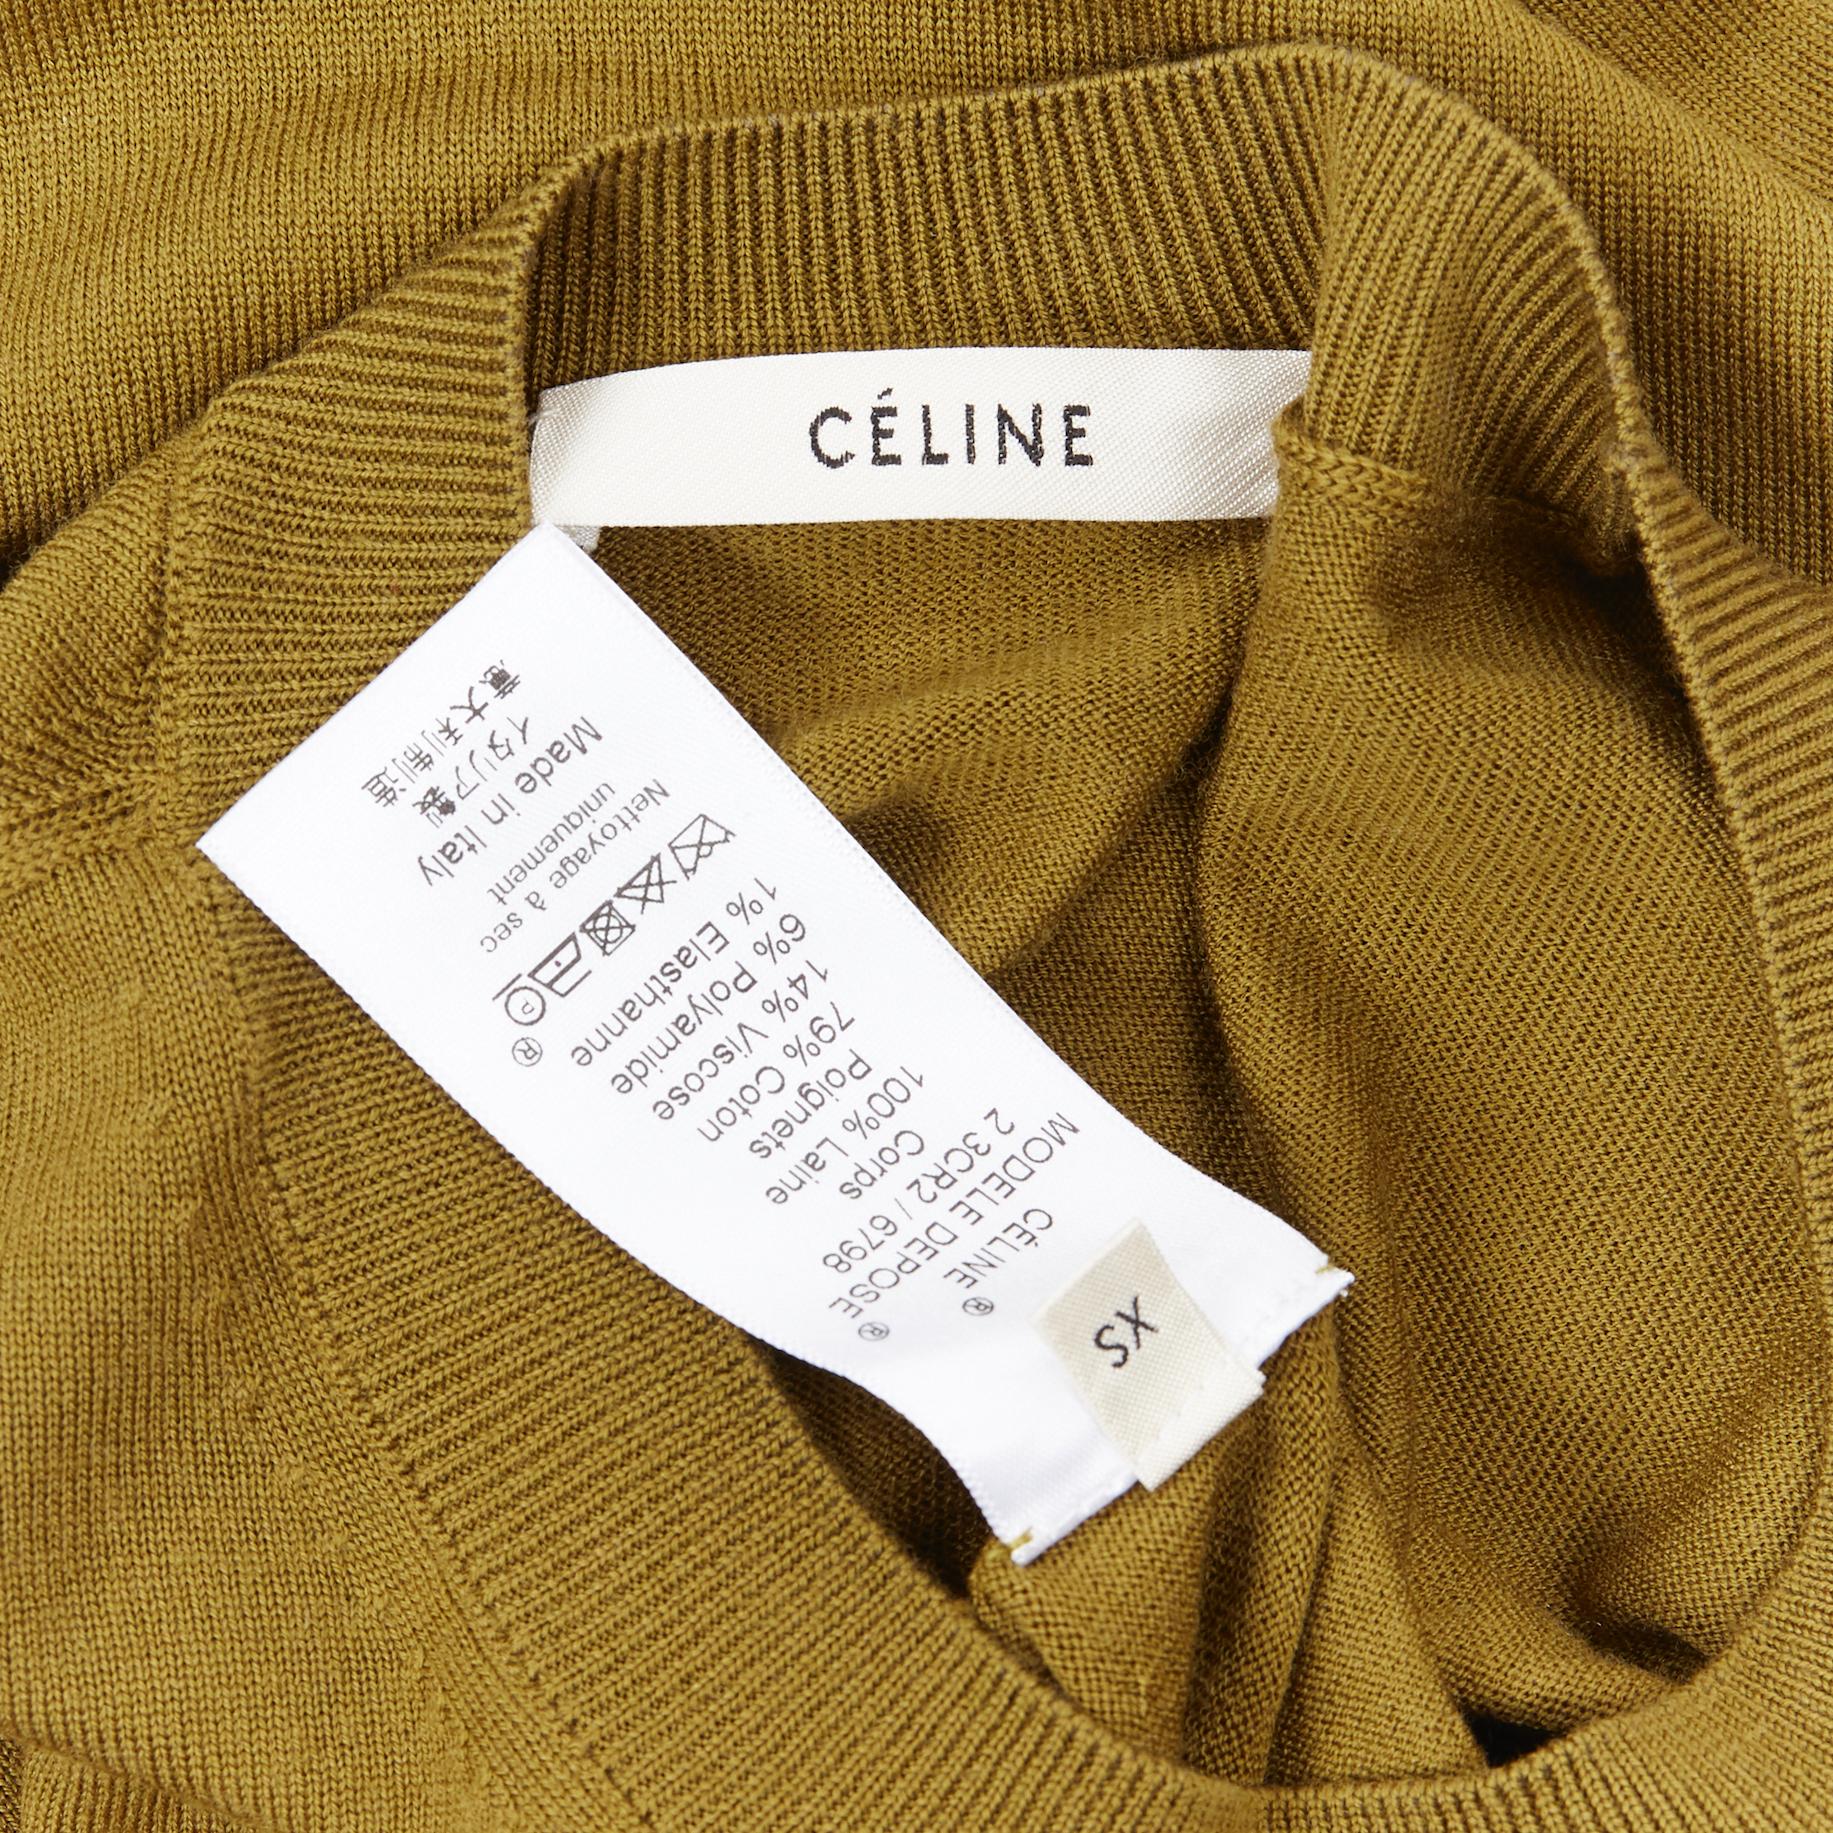 CELINE PHOEBE PHILO 100% wool green vintage logo embroidery cuff sweater XS 2